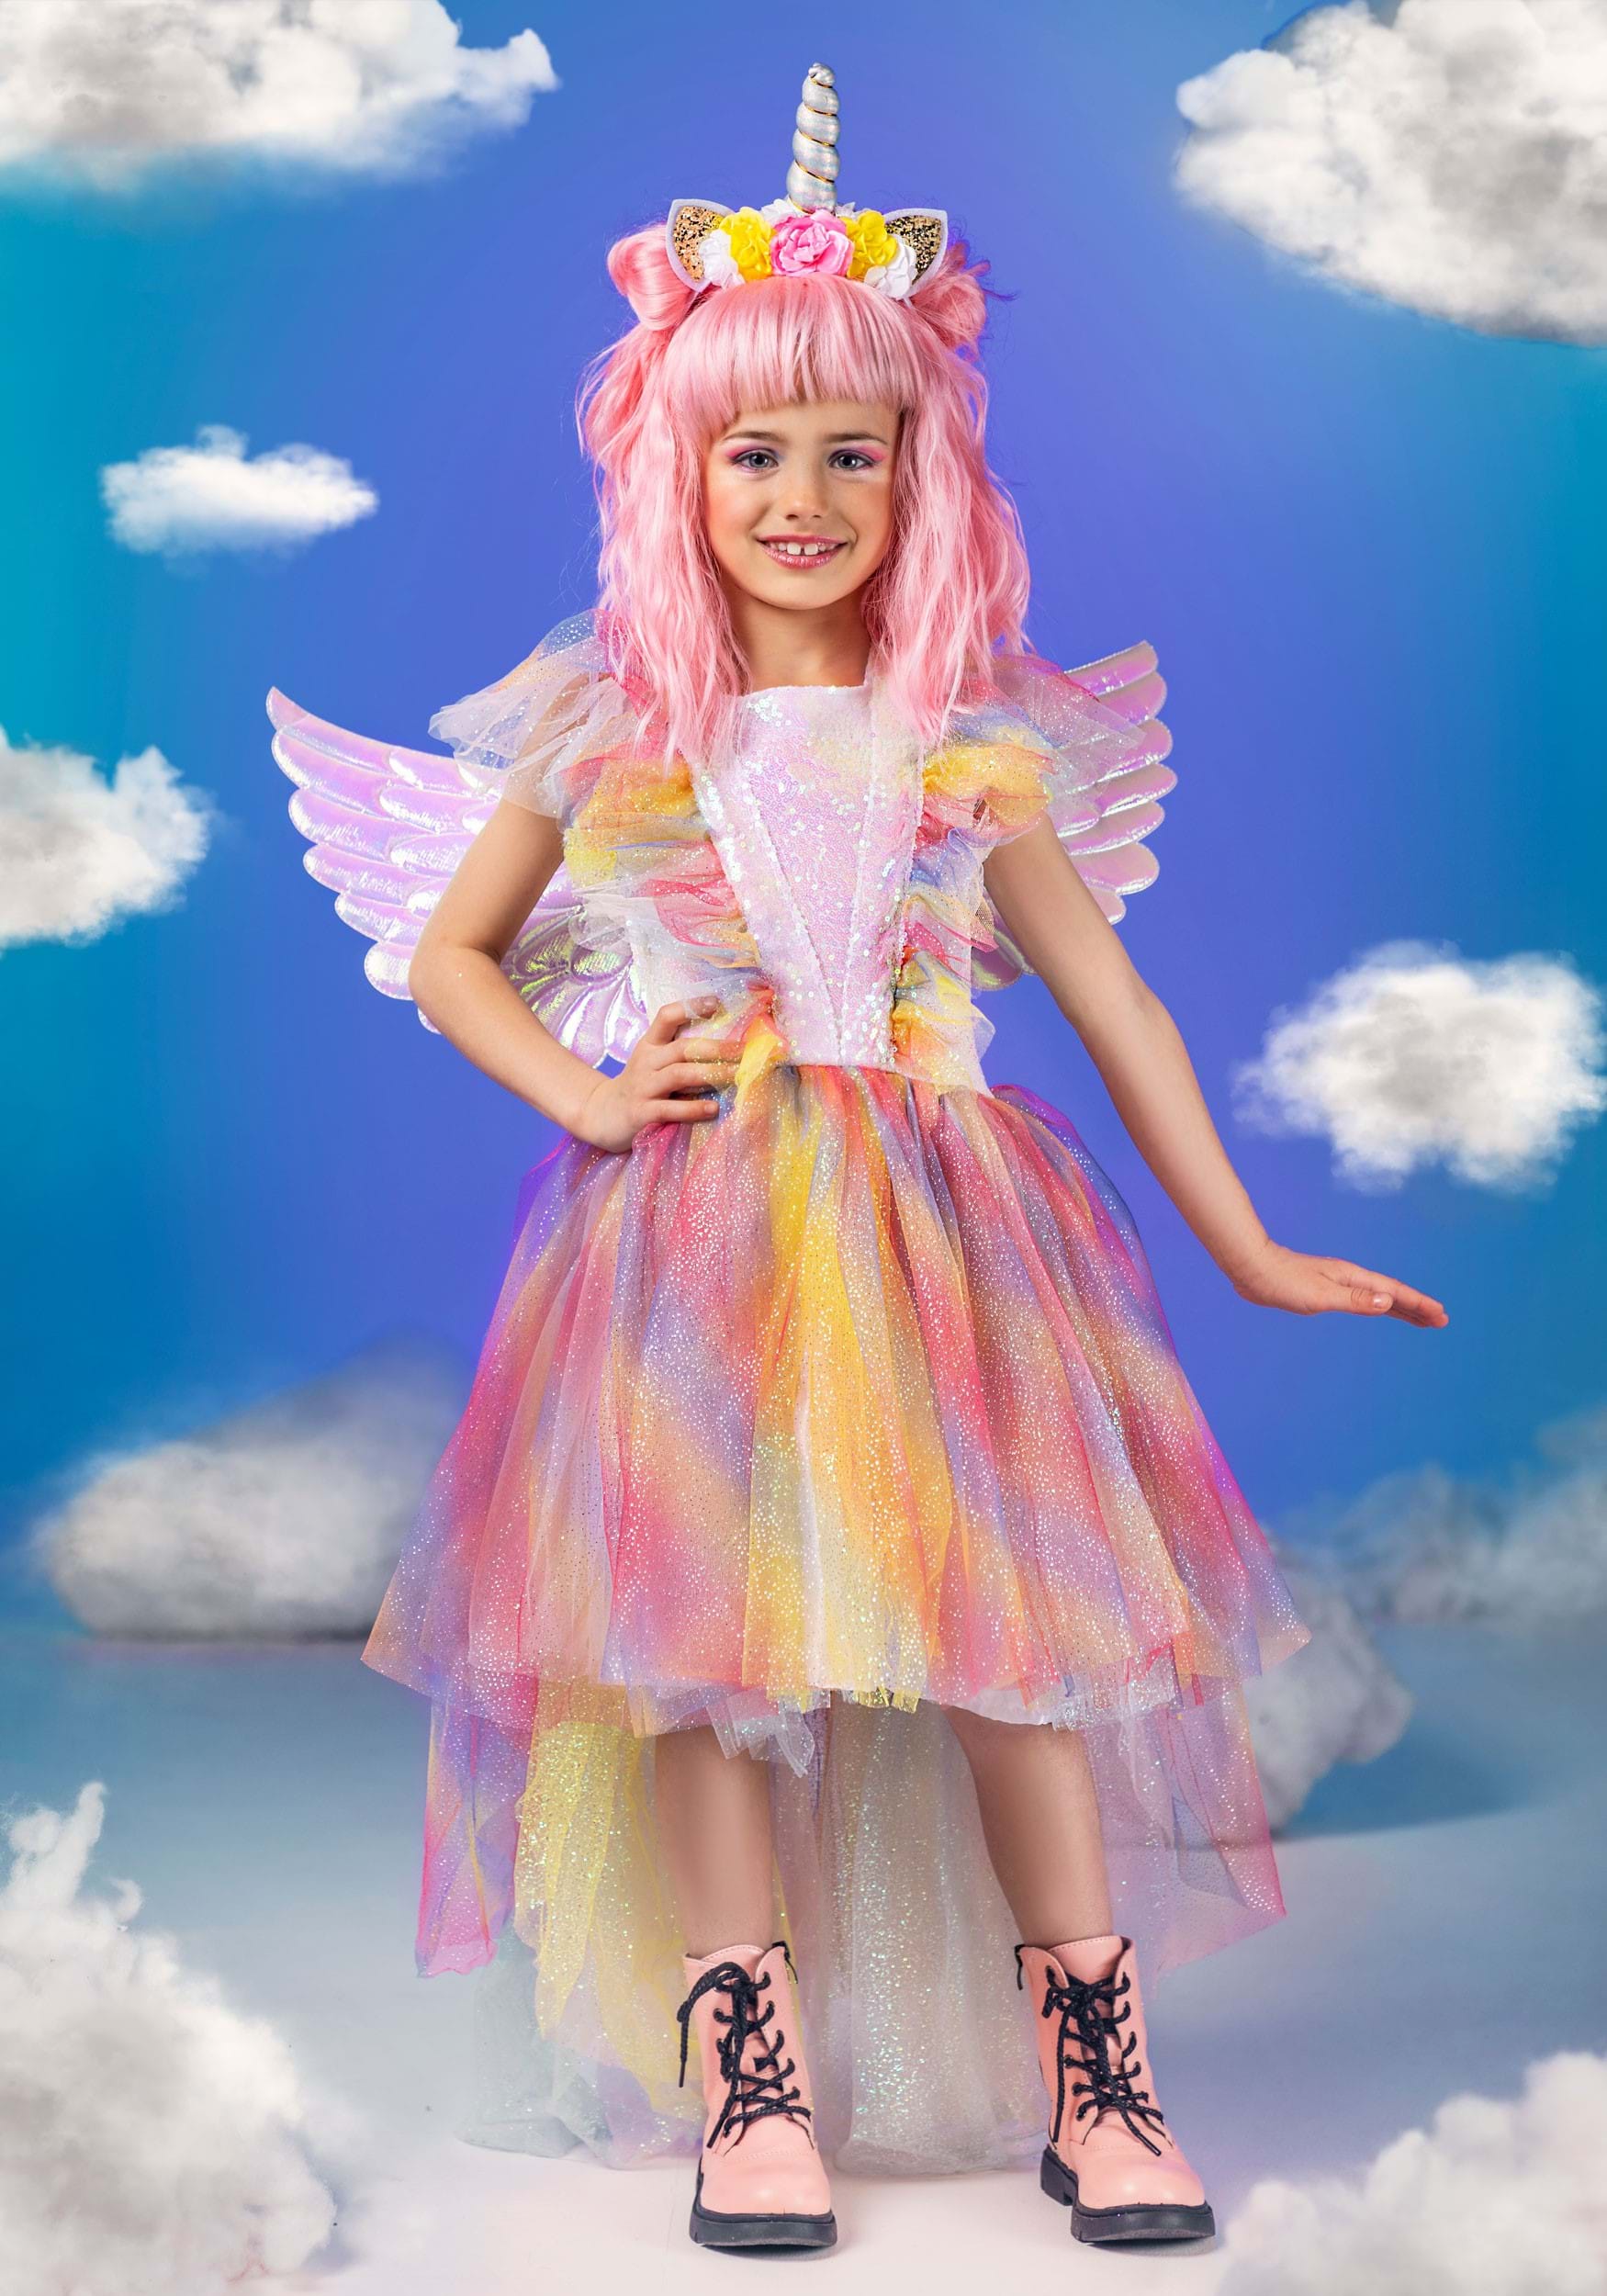 https://images.halloweencostumes.ca/products/79537/1-1/girls-deluxe-winged-unicorn-costume.jpg